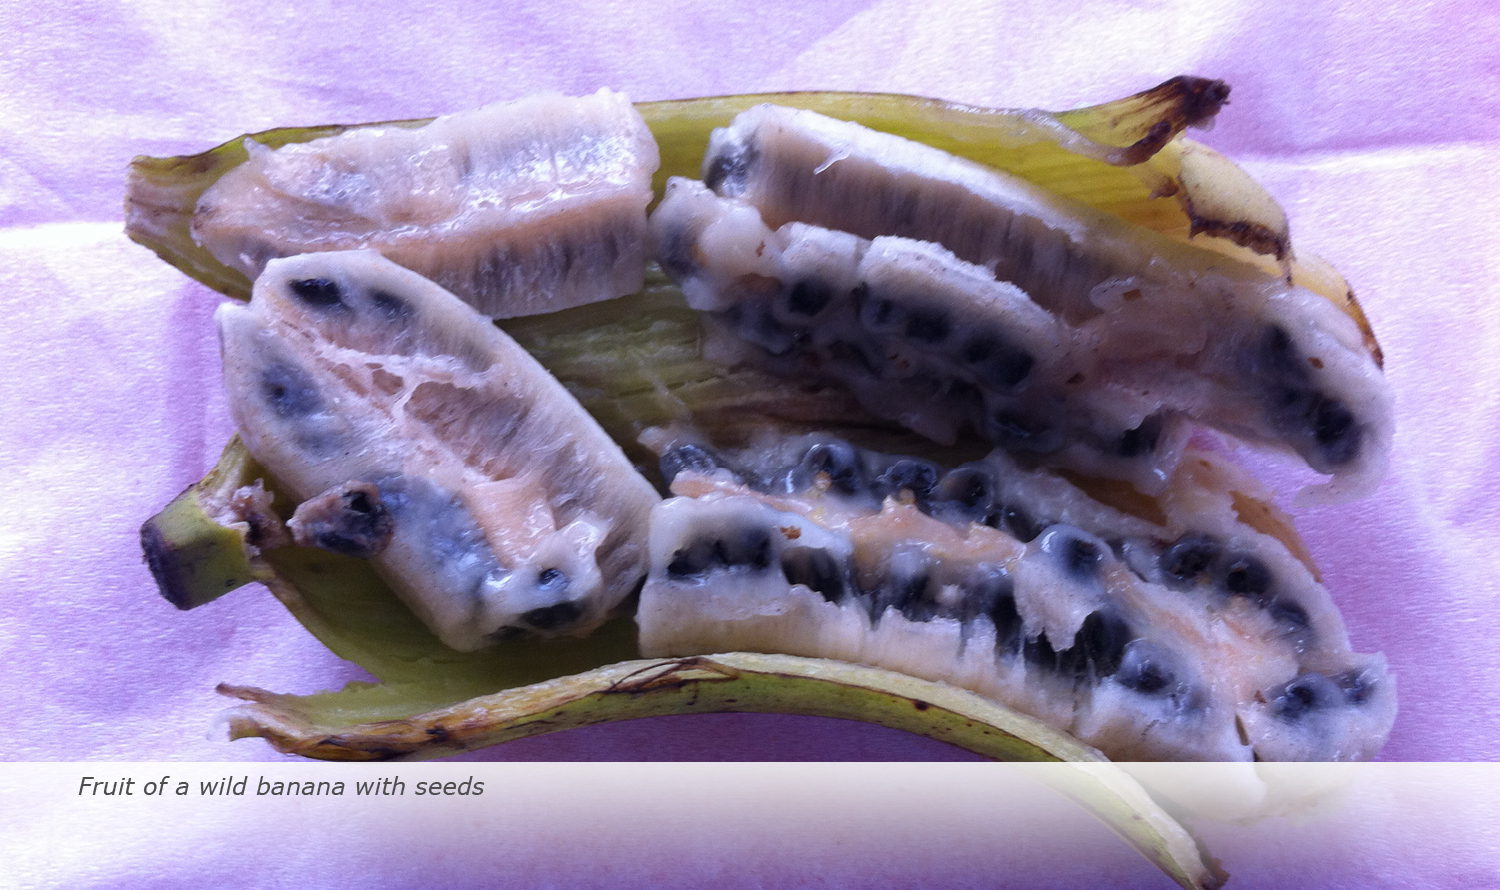 Info & Facts: Fruit of a wild banana with seeds